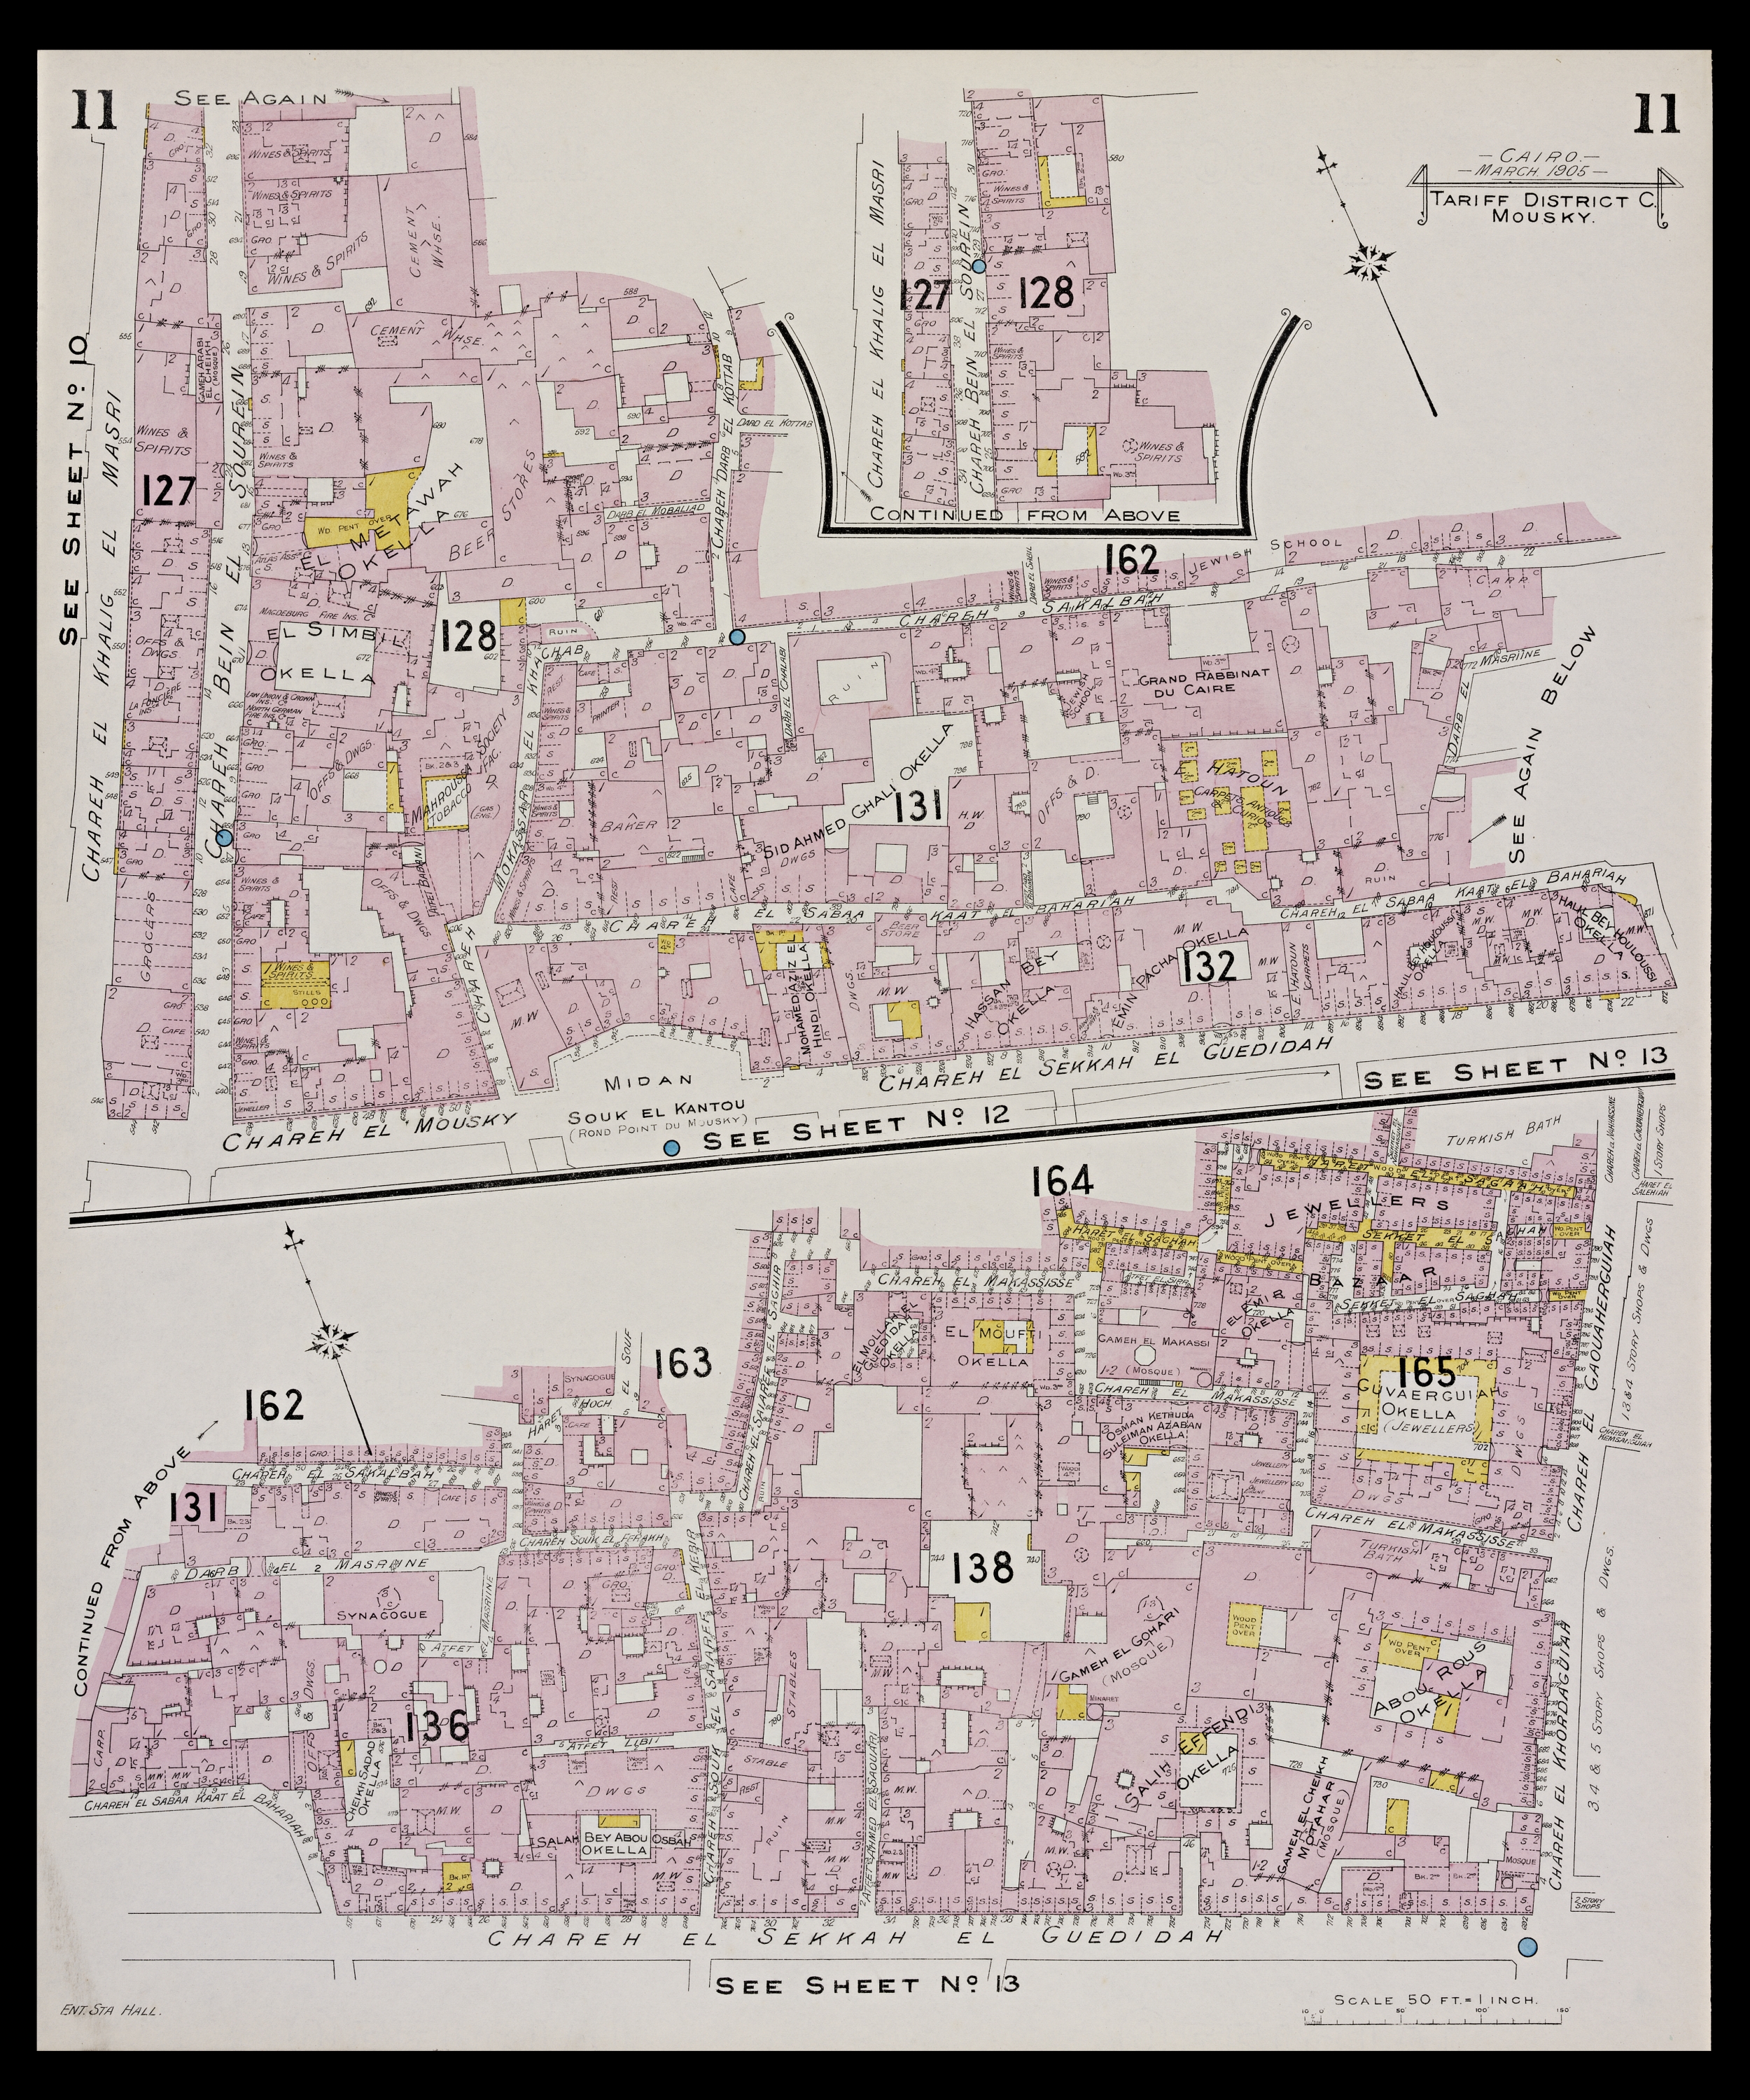 Charles E. Goad - <span style="color: rgb(1, 1, 1); line-height: 16px;">A sheet from the&nbsp;</span><span style="color: rgb(1, 1, 1); line-height: 16px; font-style: italic;">Insurance Plan of Cairo</span><span style="color: rgb(1, 1, 1); line-height: 16px;">. The complete set of plans can be found on&nbsp;</span><a href="http://archnet.org/publications/10218" target="_blank" data-bypass="true" style="line-height: 16px;">Archnet</a><span style="color: rgb(1, 1, 1); line-height: 16px;">, or as georeferenced versions in the&nbsp;</span><a href="http://calvert.hul.harvard.edu:8080/opengeoportal/openGeoPortalHome.jsp?BasicSearchTerm=ExternalLayerId:1246" target="_blank" data-bypass="true" style="line-height: 16px;">Harvard Geospatial Library</a><span style="color: rgb(1, 1, 1); line-height: 16px;">.</span>